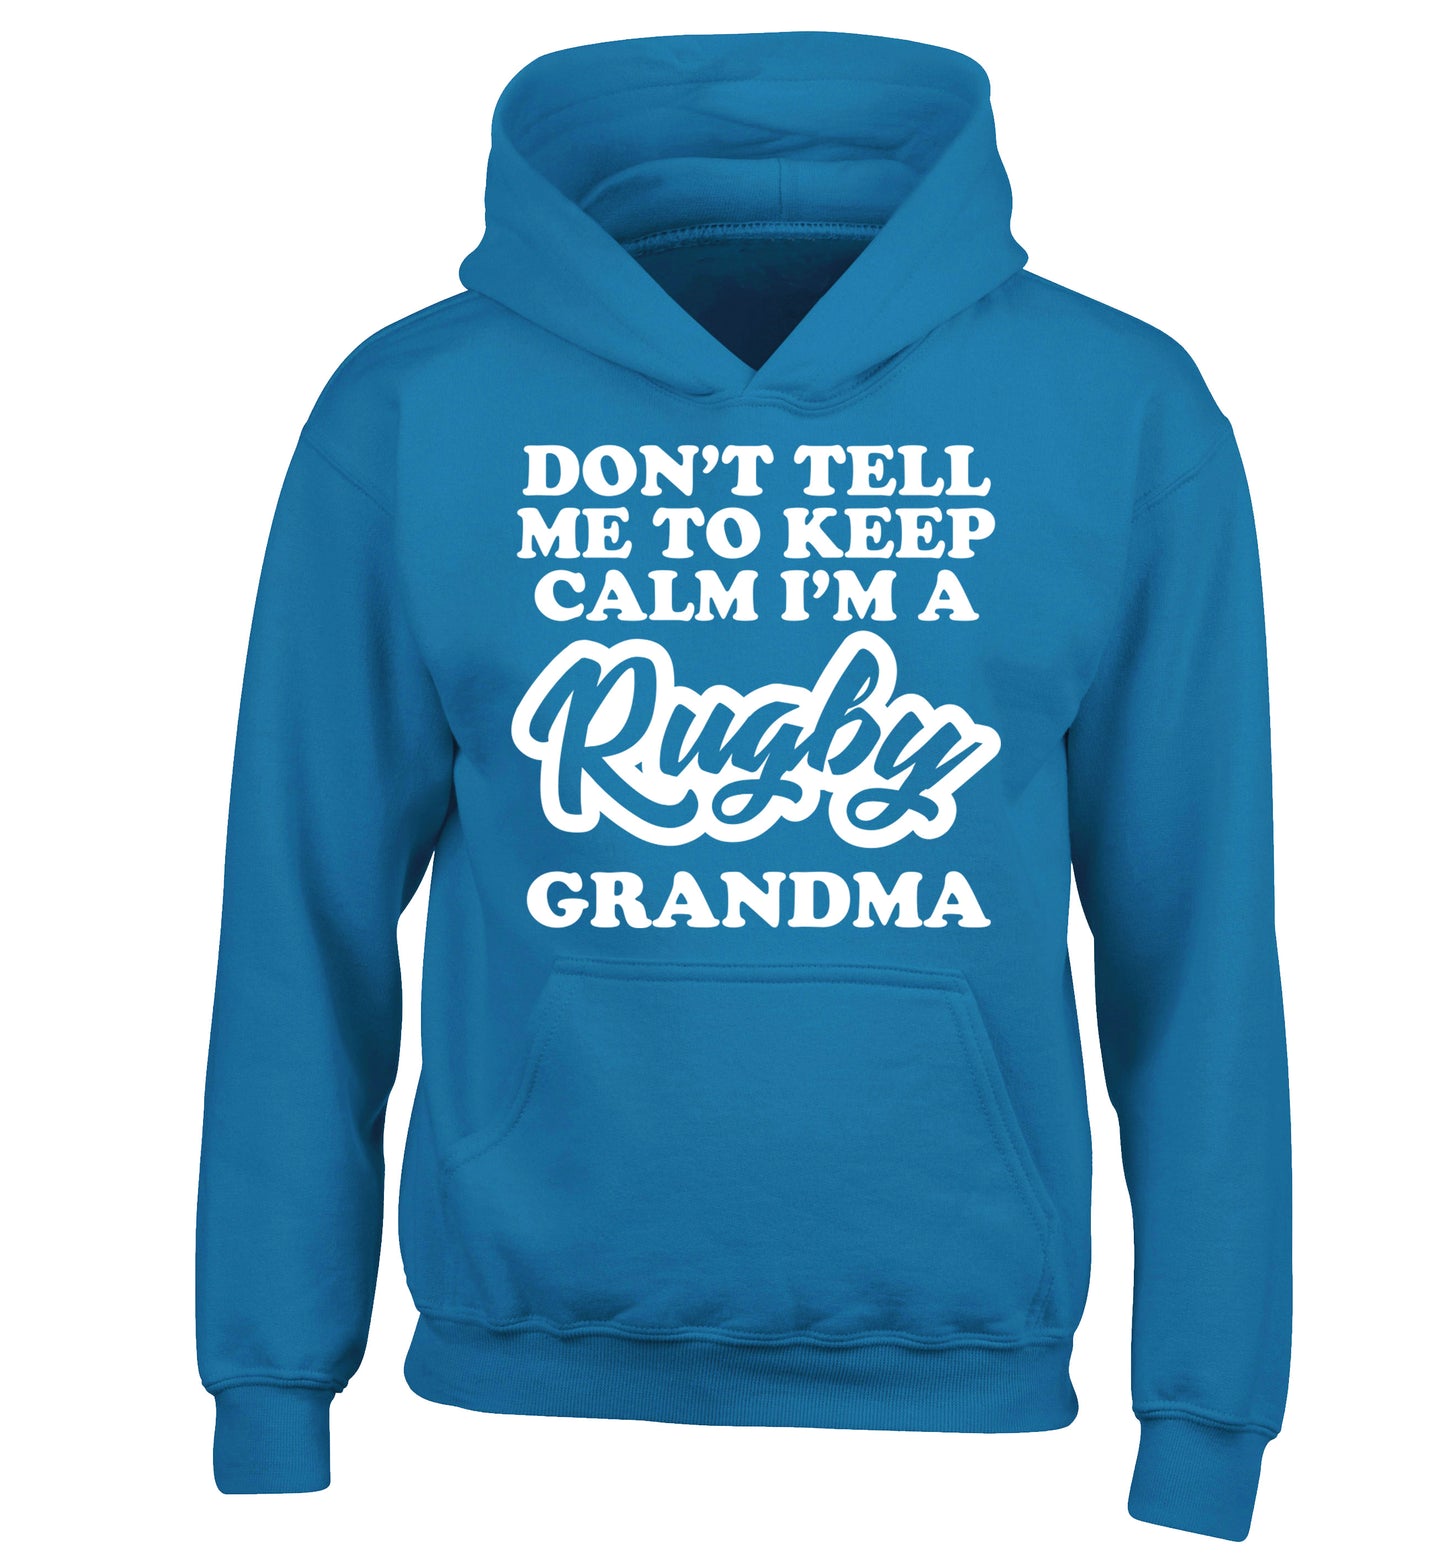 Don't tell me to keep calm I'm a rugby grandma children's blue hoodie 12-13 Years